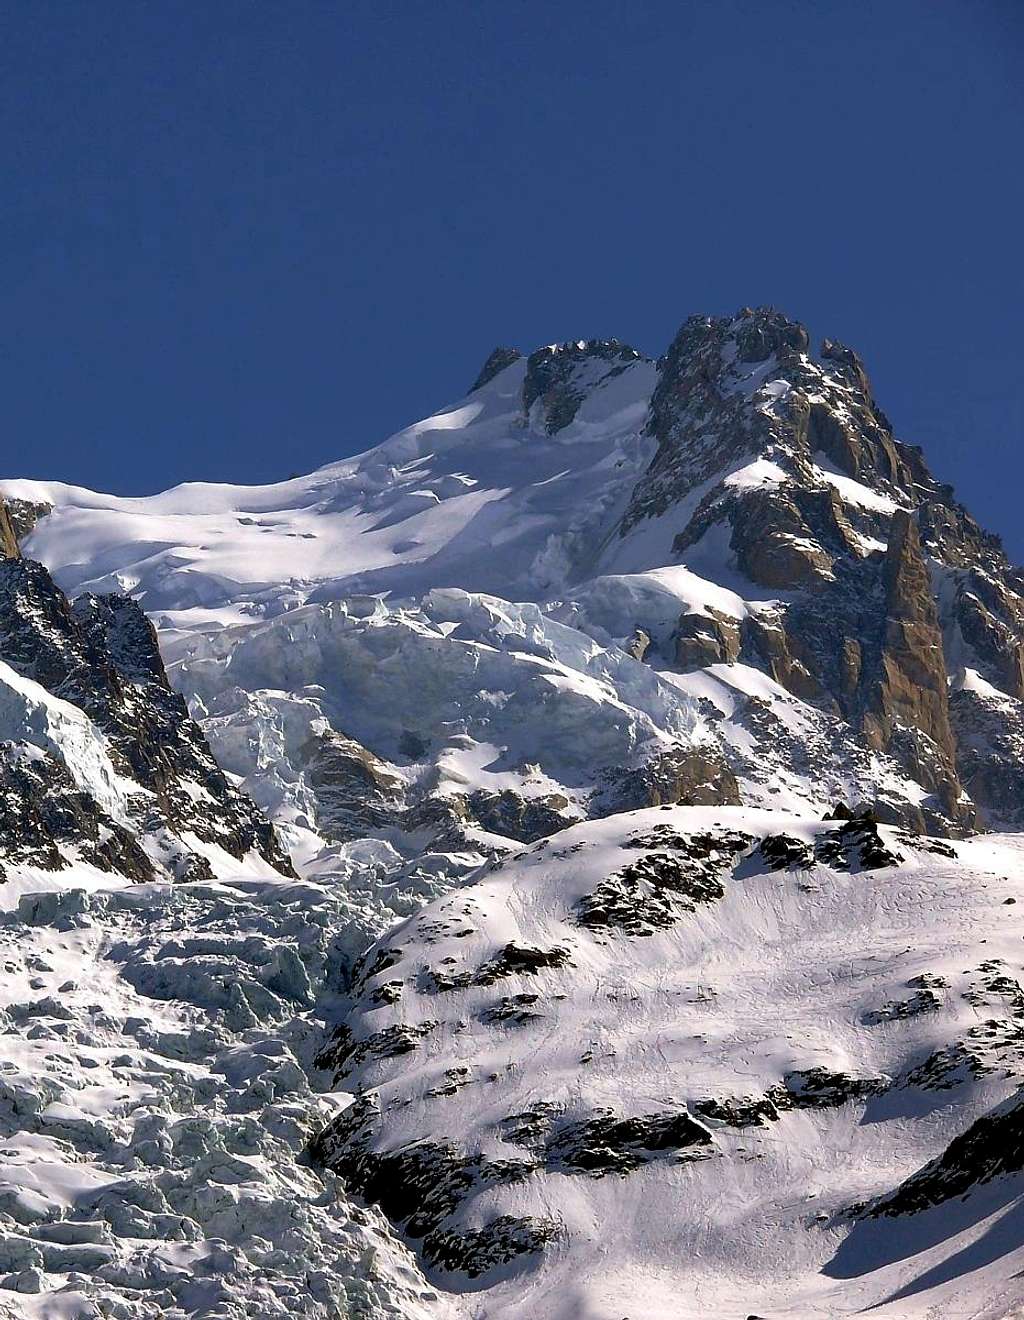 North side of Mont Maudit